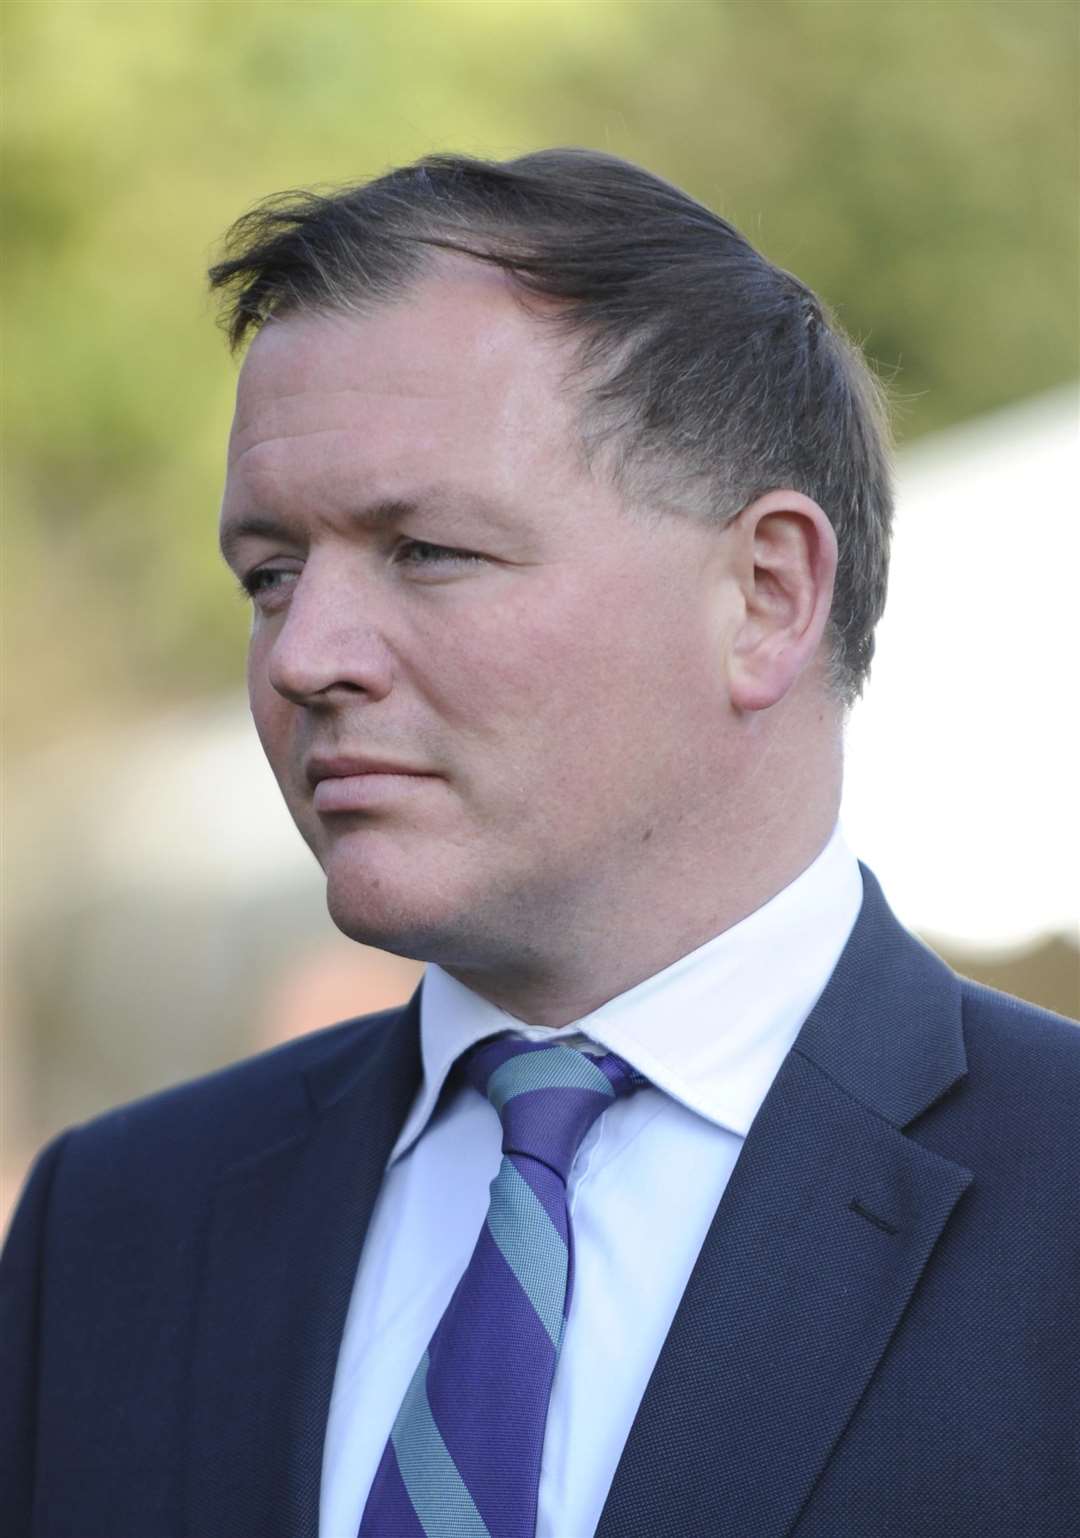 MP Damian Collins says he cannot support Brexit deal